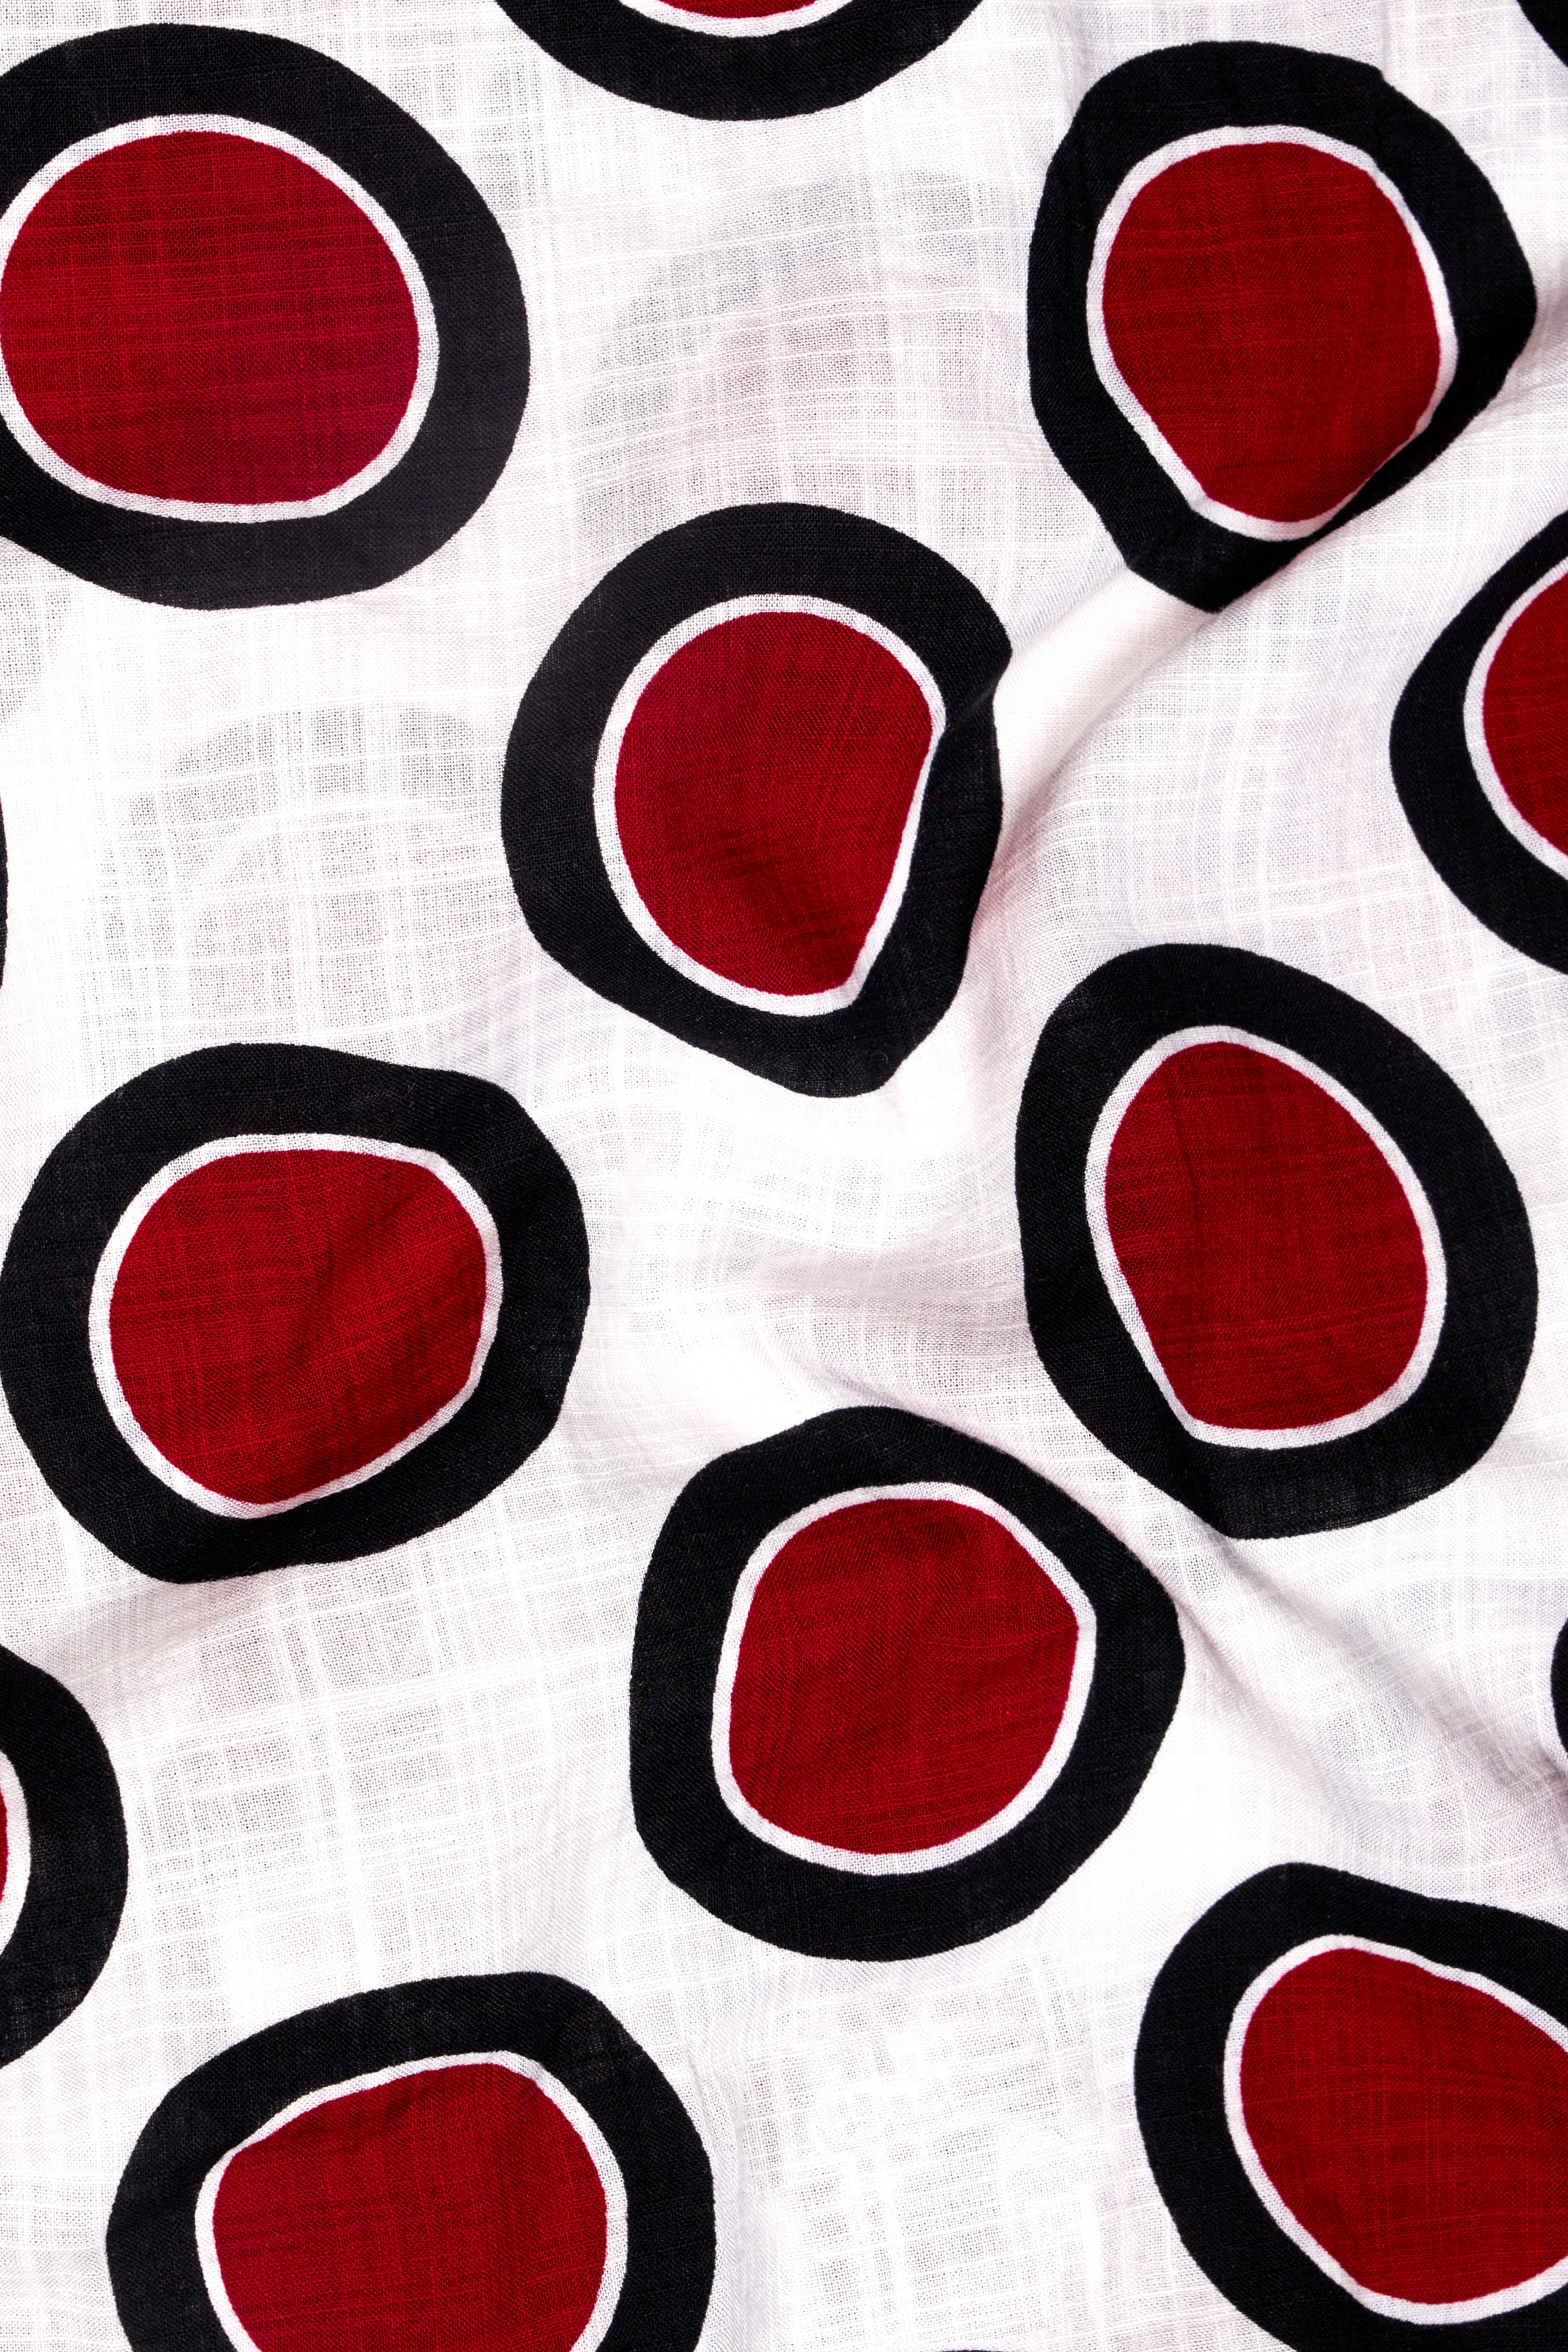 Bright White with Scarlet Red and Black Printed Lightweight Oversized Premium Cotton Designer Shirt